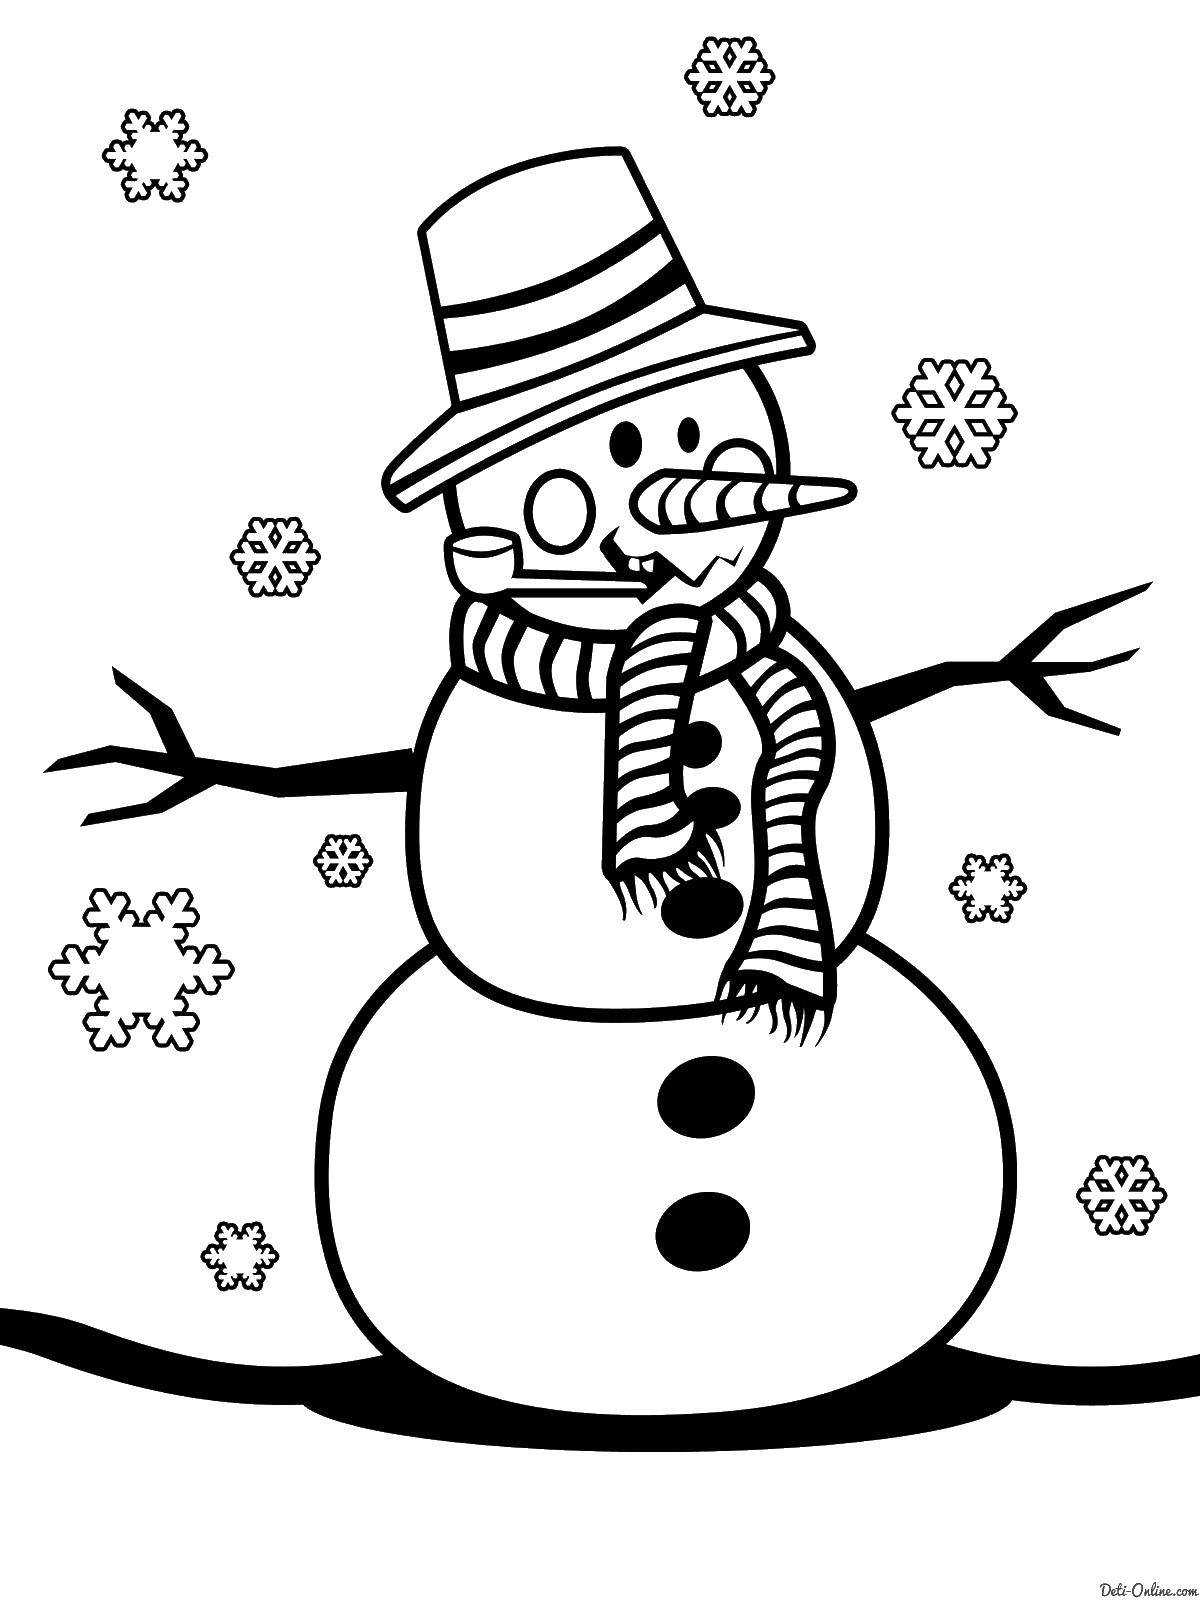 Coloring Snowman. Category coloring of the figures. Tags:  snowman musty, scarf.